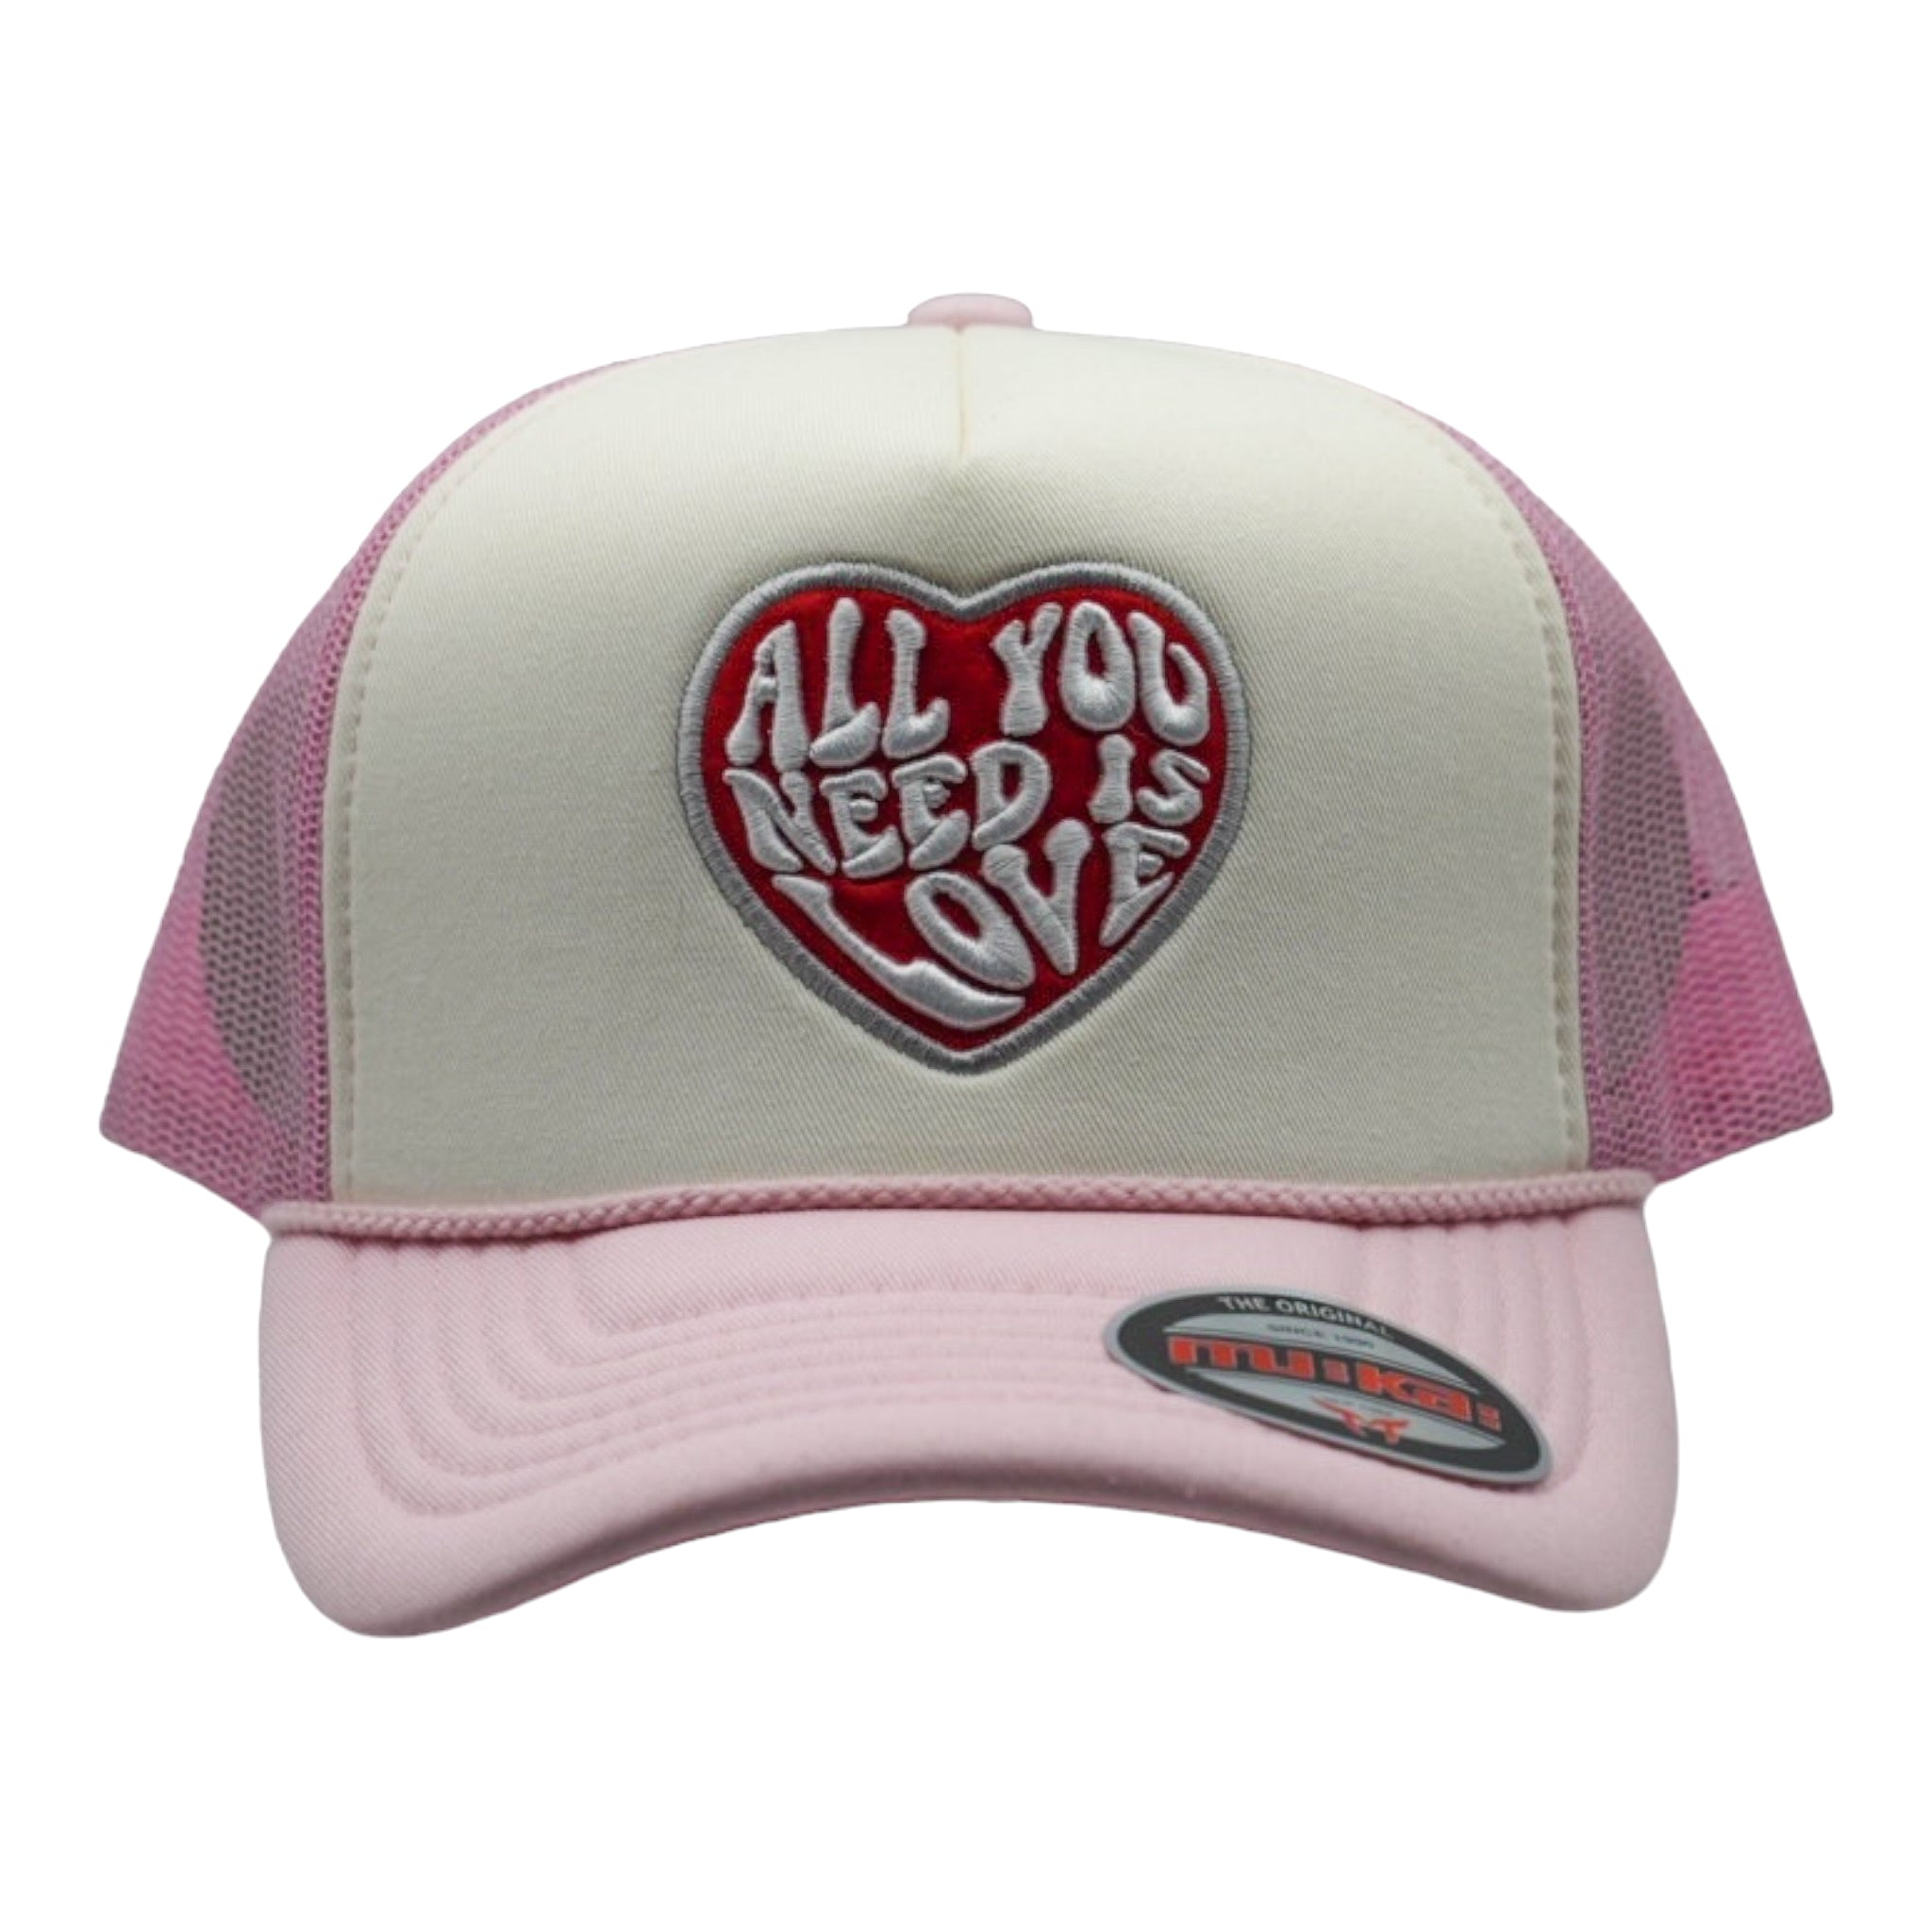 MUKA - ALL YOU NEED IS LOVE TRUCKER HAT